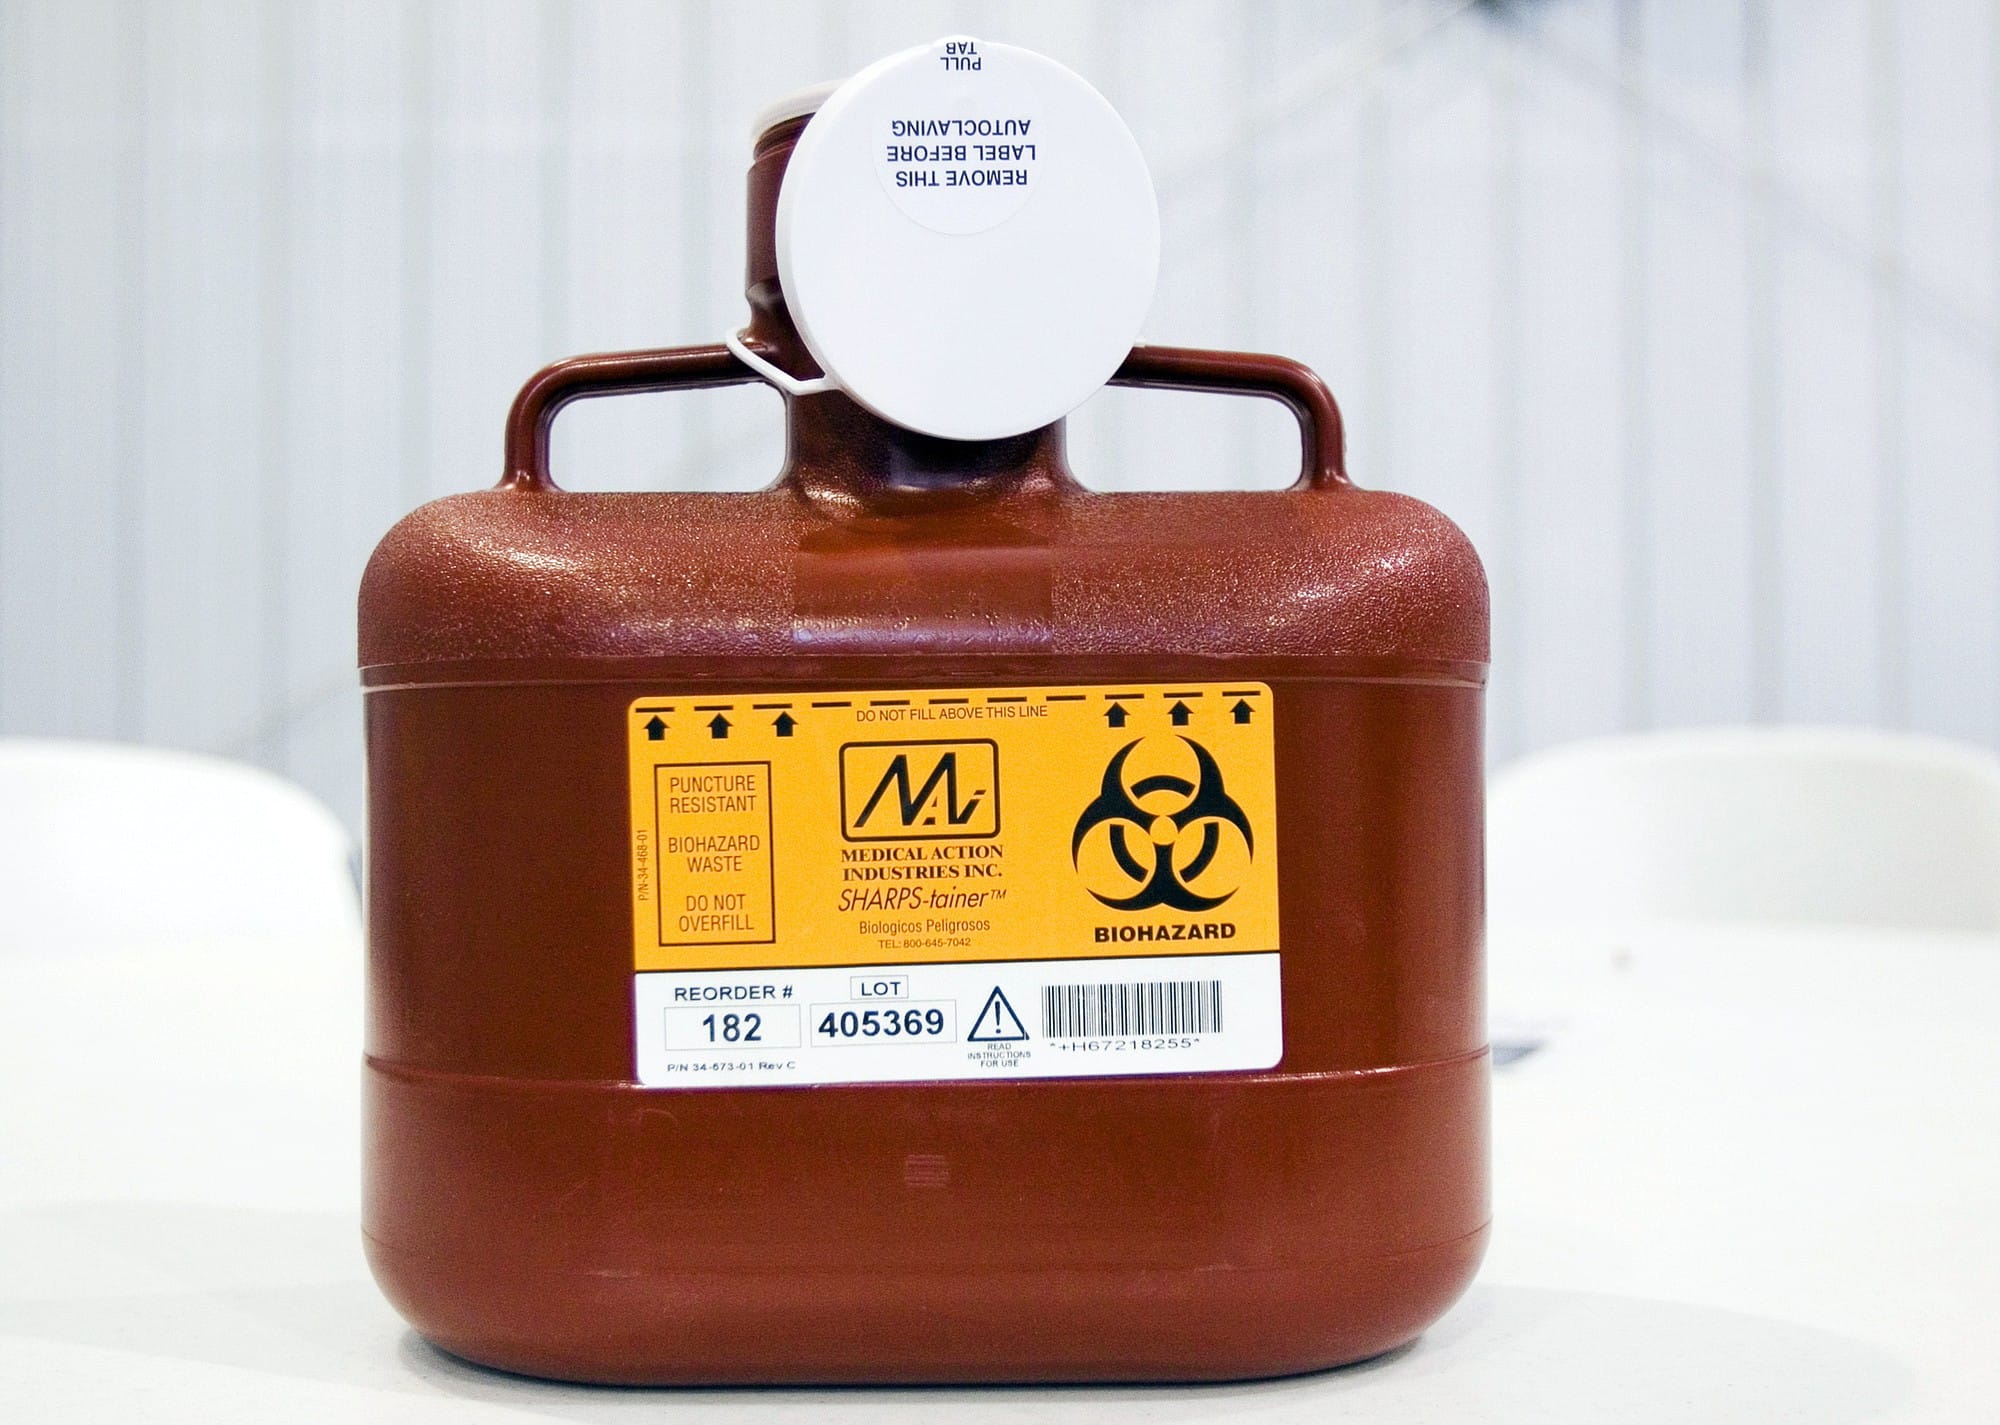 A biohazard container used for the temporary disposal of needles and other sharp objects at an HIV/AIDS training session in Austin, Indiana.